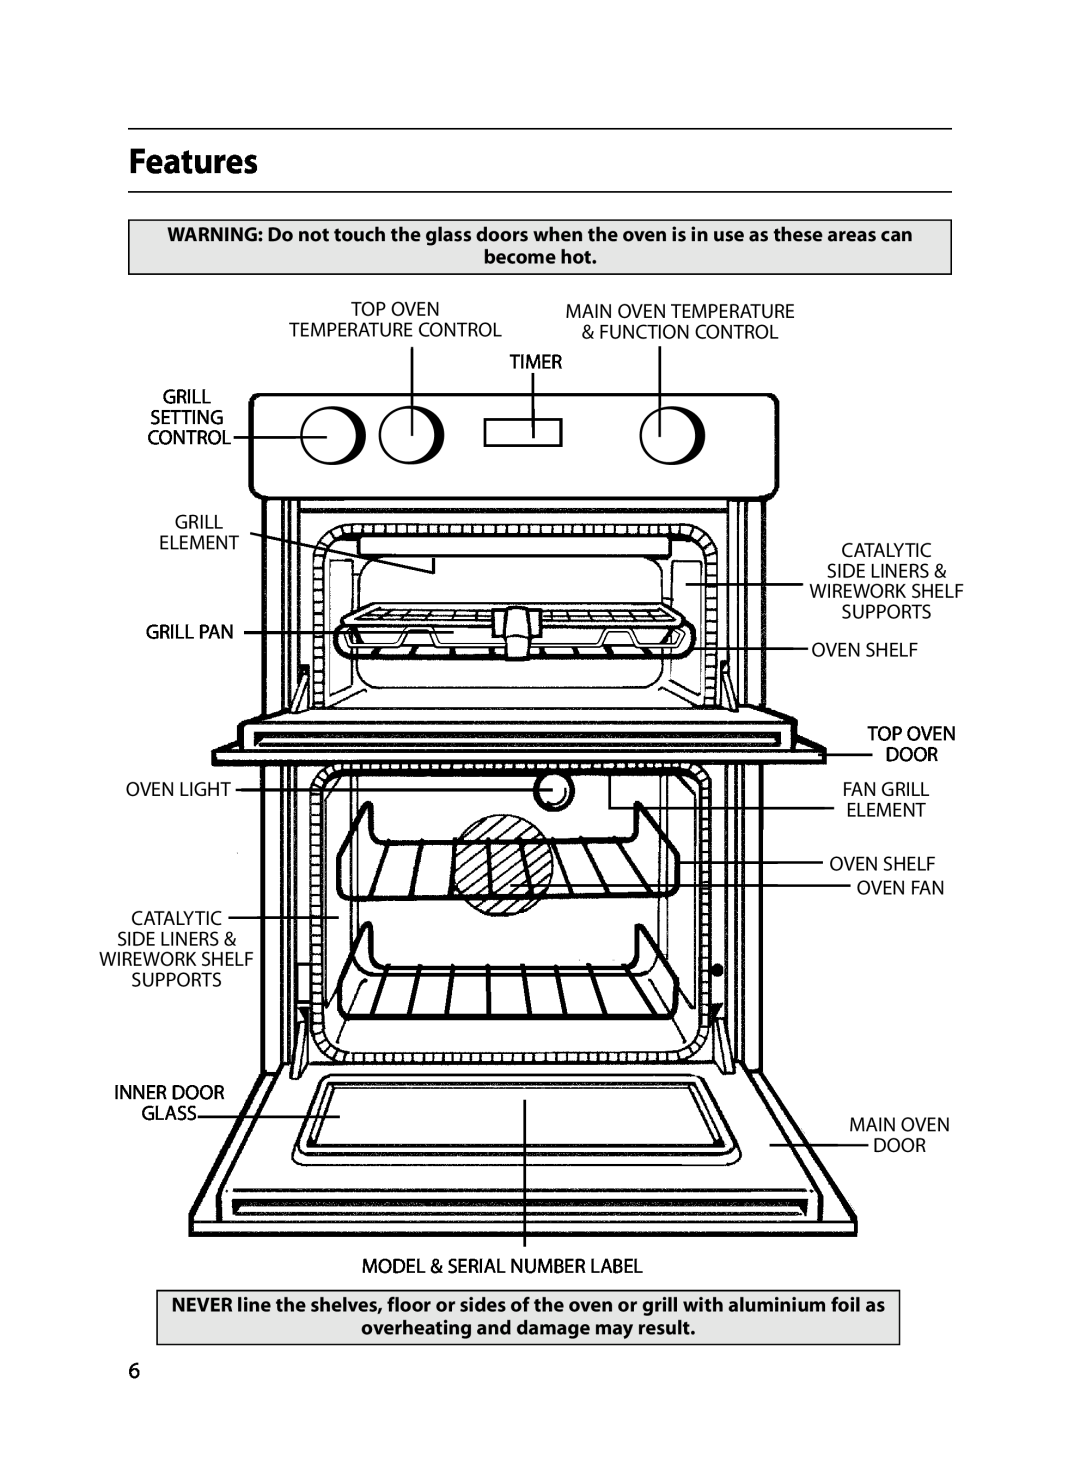 Indesit FIU20 MK2 manual Features, become hot, overheating and damage may result 